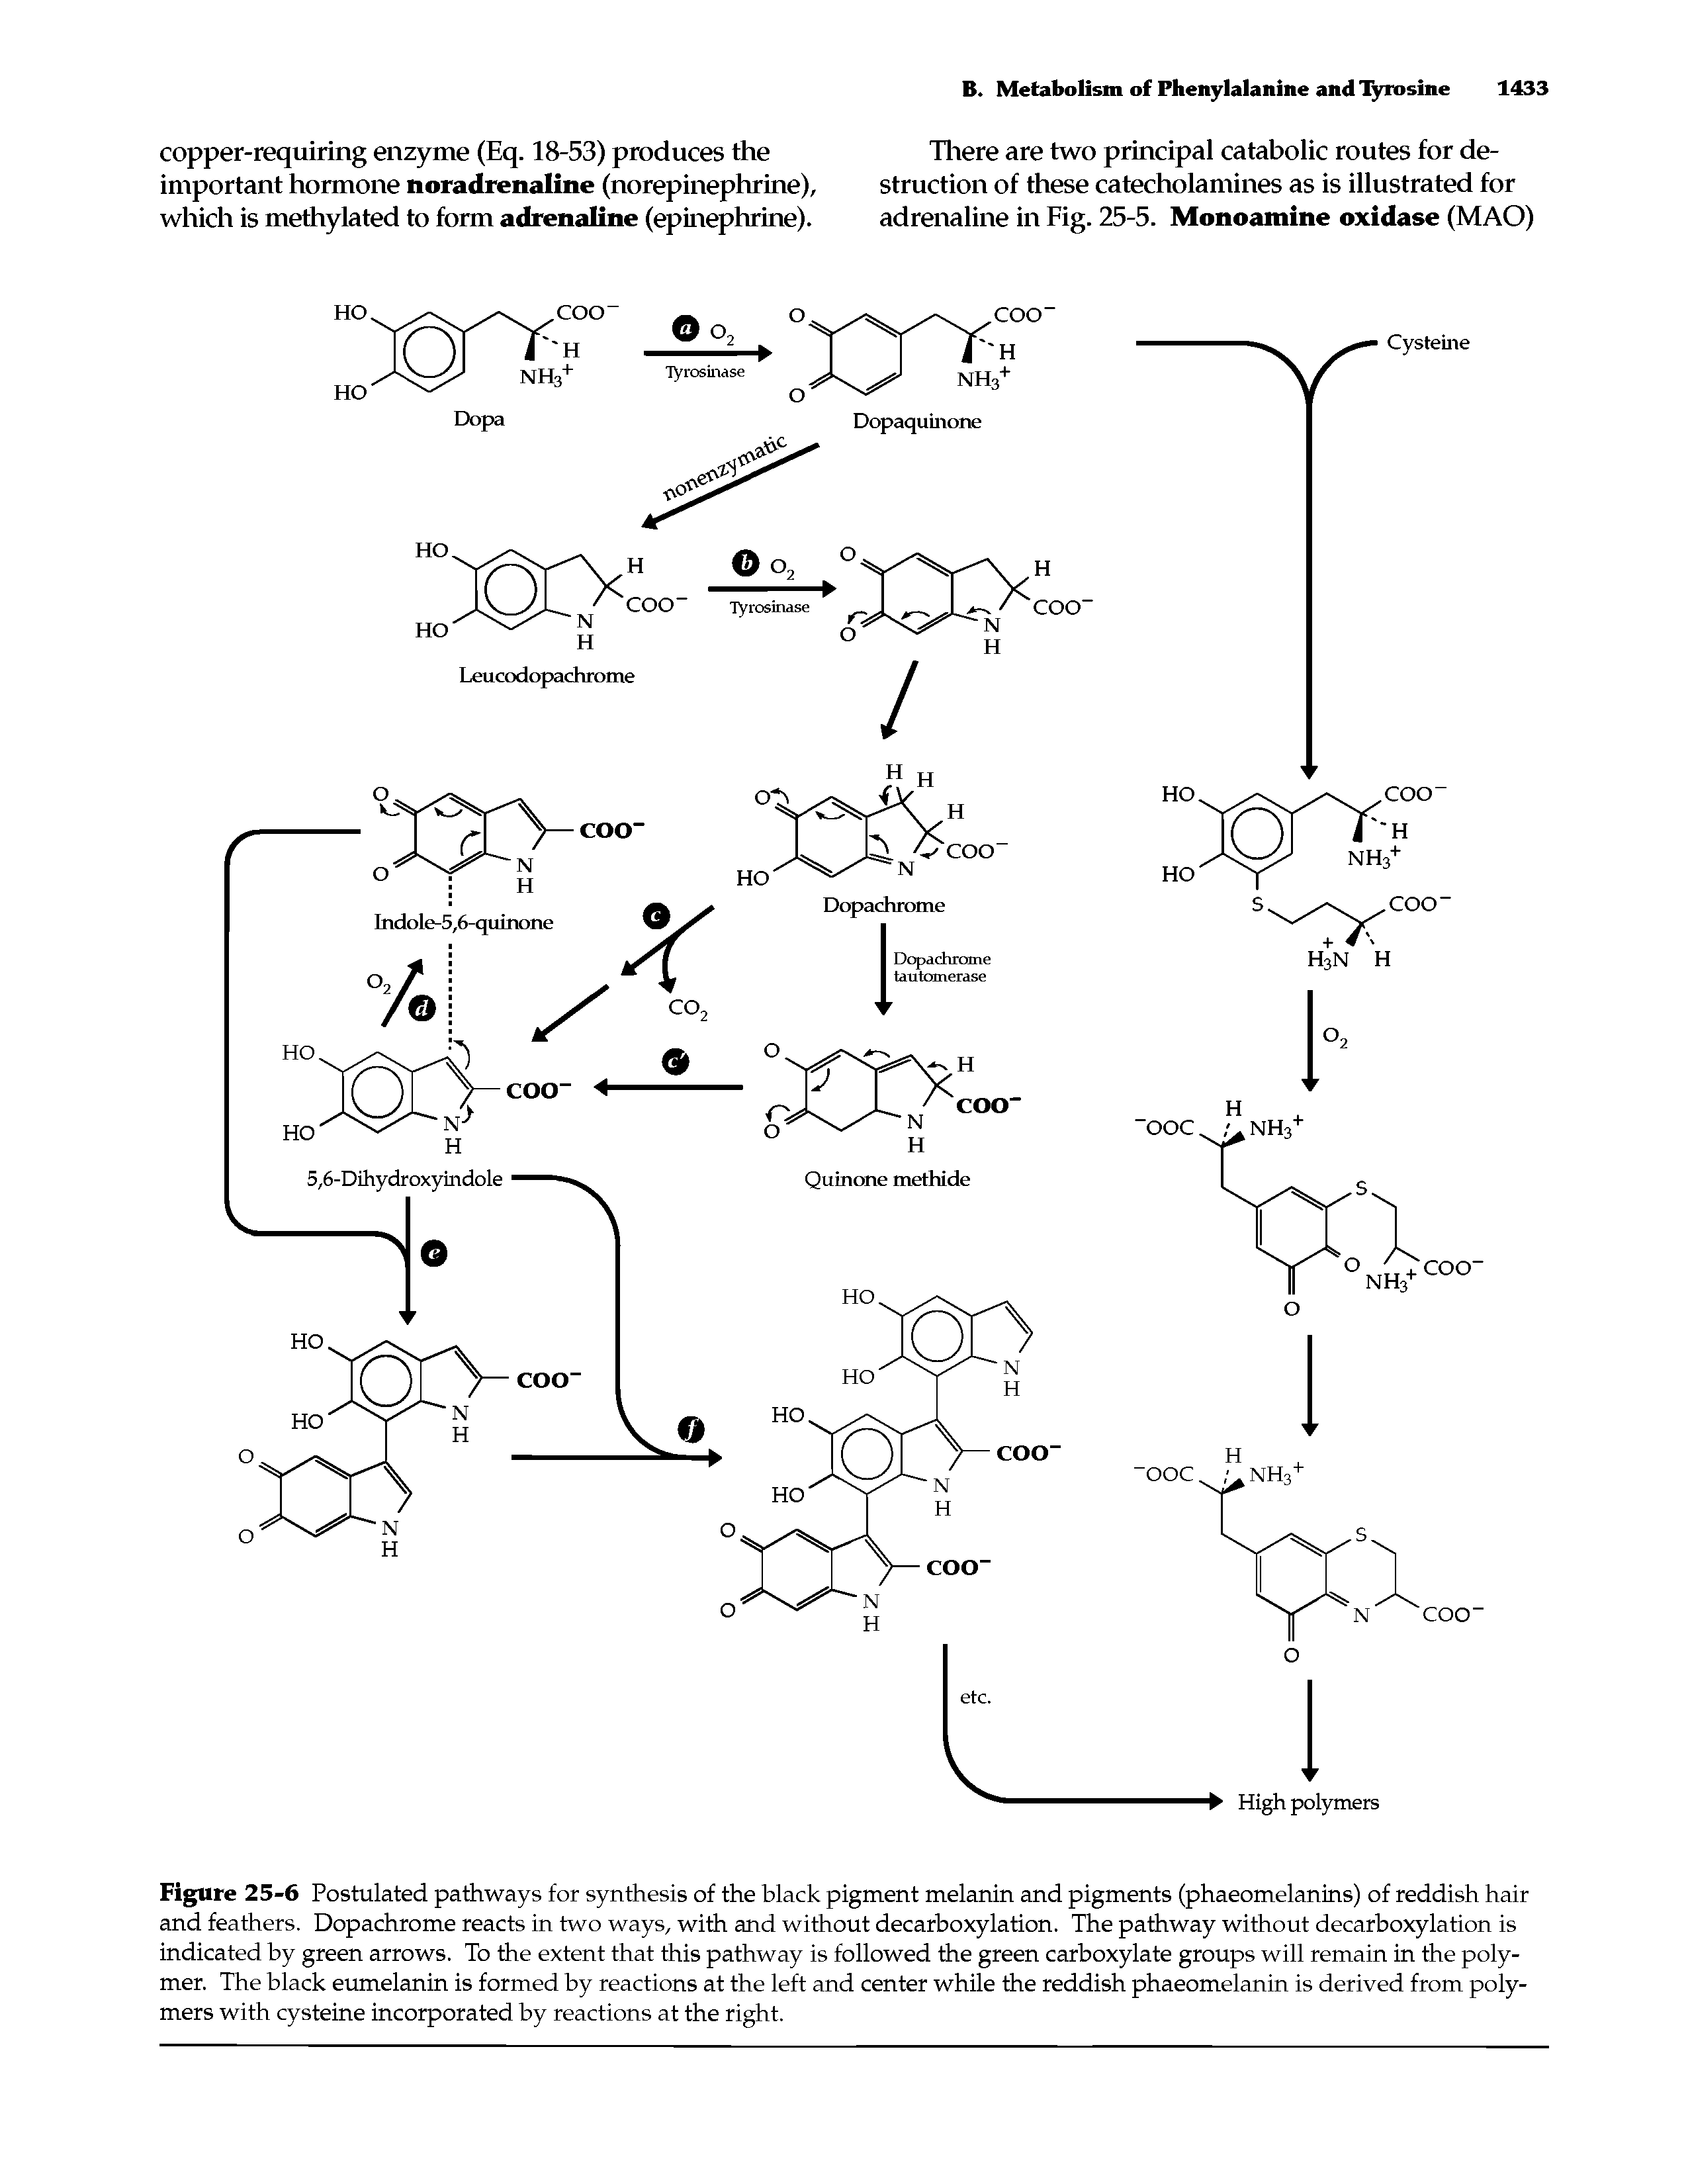 Figure 25-6 Postulated pathways for synthesis of the black pigment melanin and pigments (phaeomelanins) of reddish hair and feathers. Dopachrome reacts in two ways, with and without decarboxylation. The pathway without decarboxylation is indicated by green arrows. To the extent that this pathway is followed the green carboxylate groups will remain in the polymer. The black eumelanin is formed by reactions at the left and center while the reddish phaeomelanin is derived from polymers with cysteine incorporated by reactions at the right.